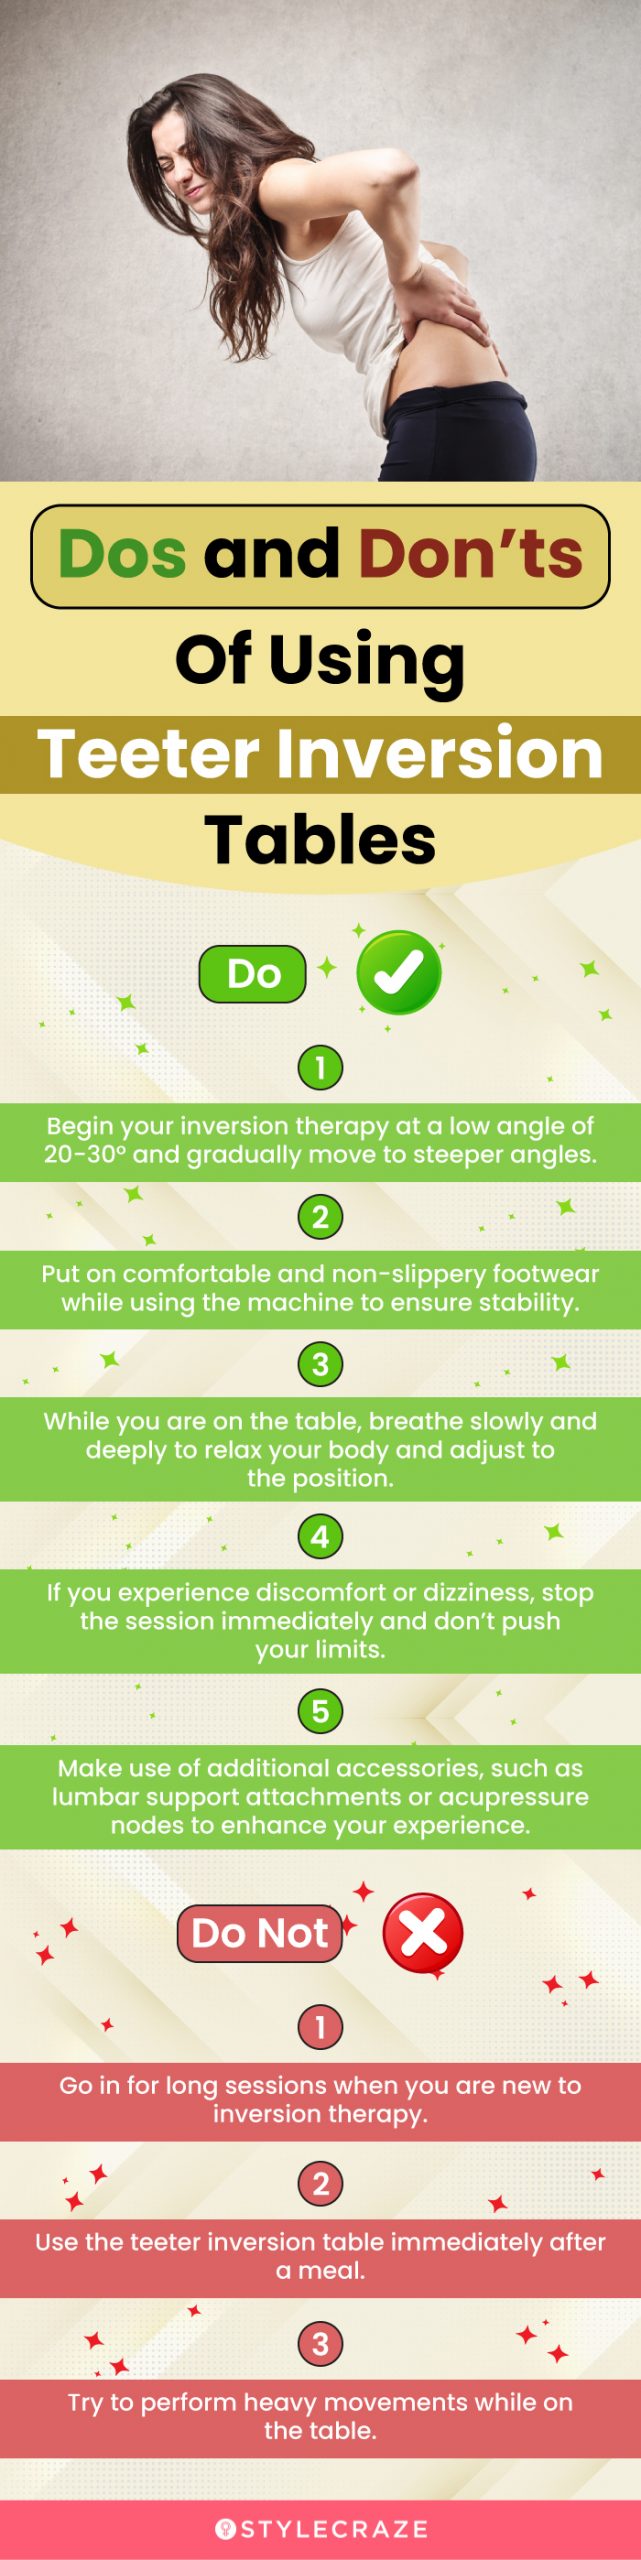 Dos and Don’ts Of Using Teeter Inversion Tables (infographic)